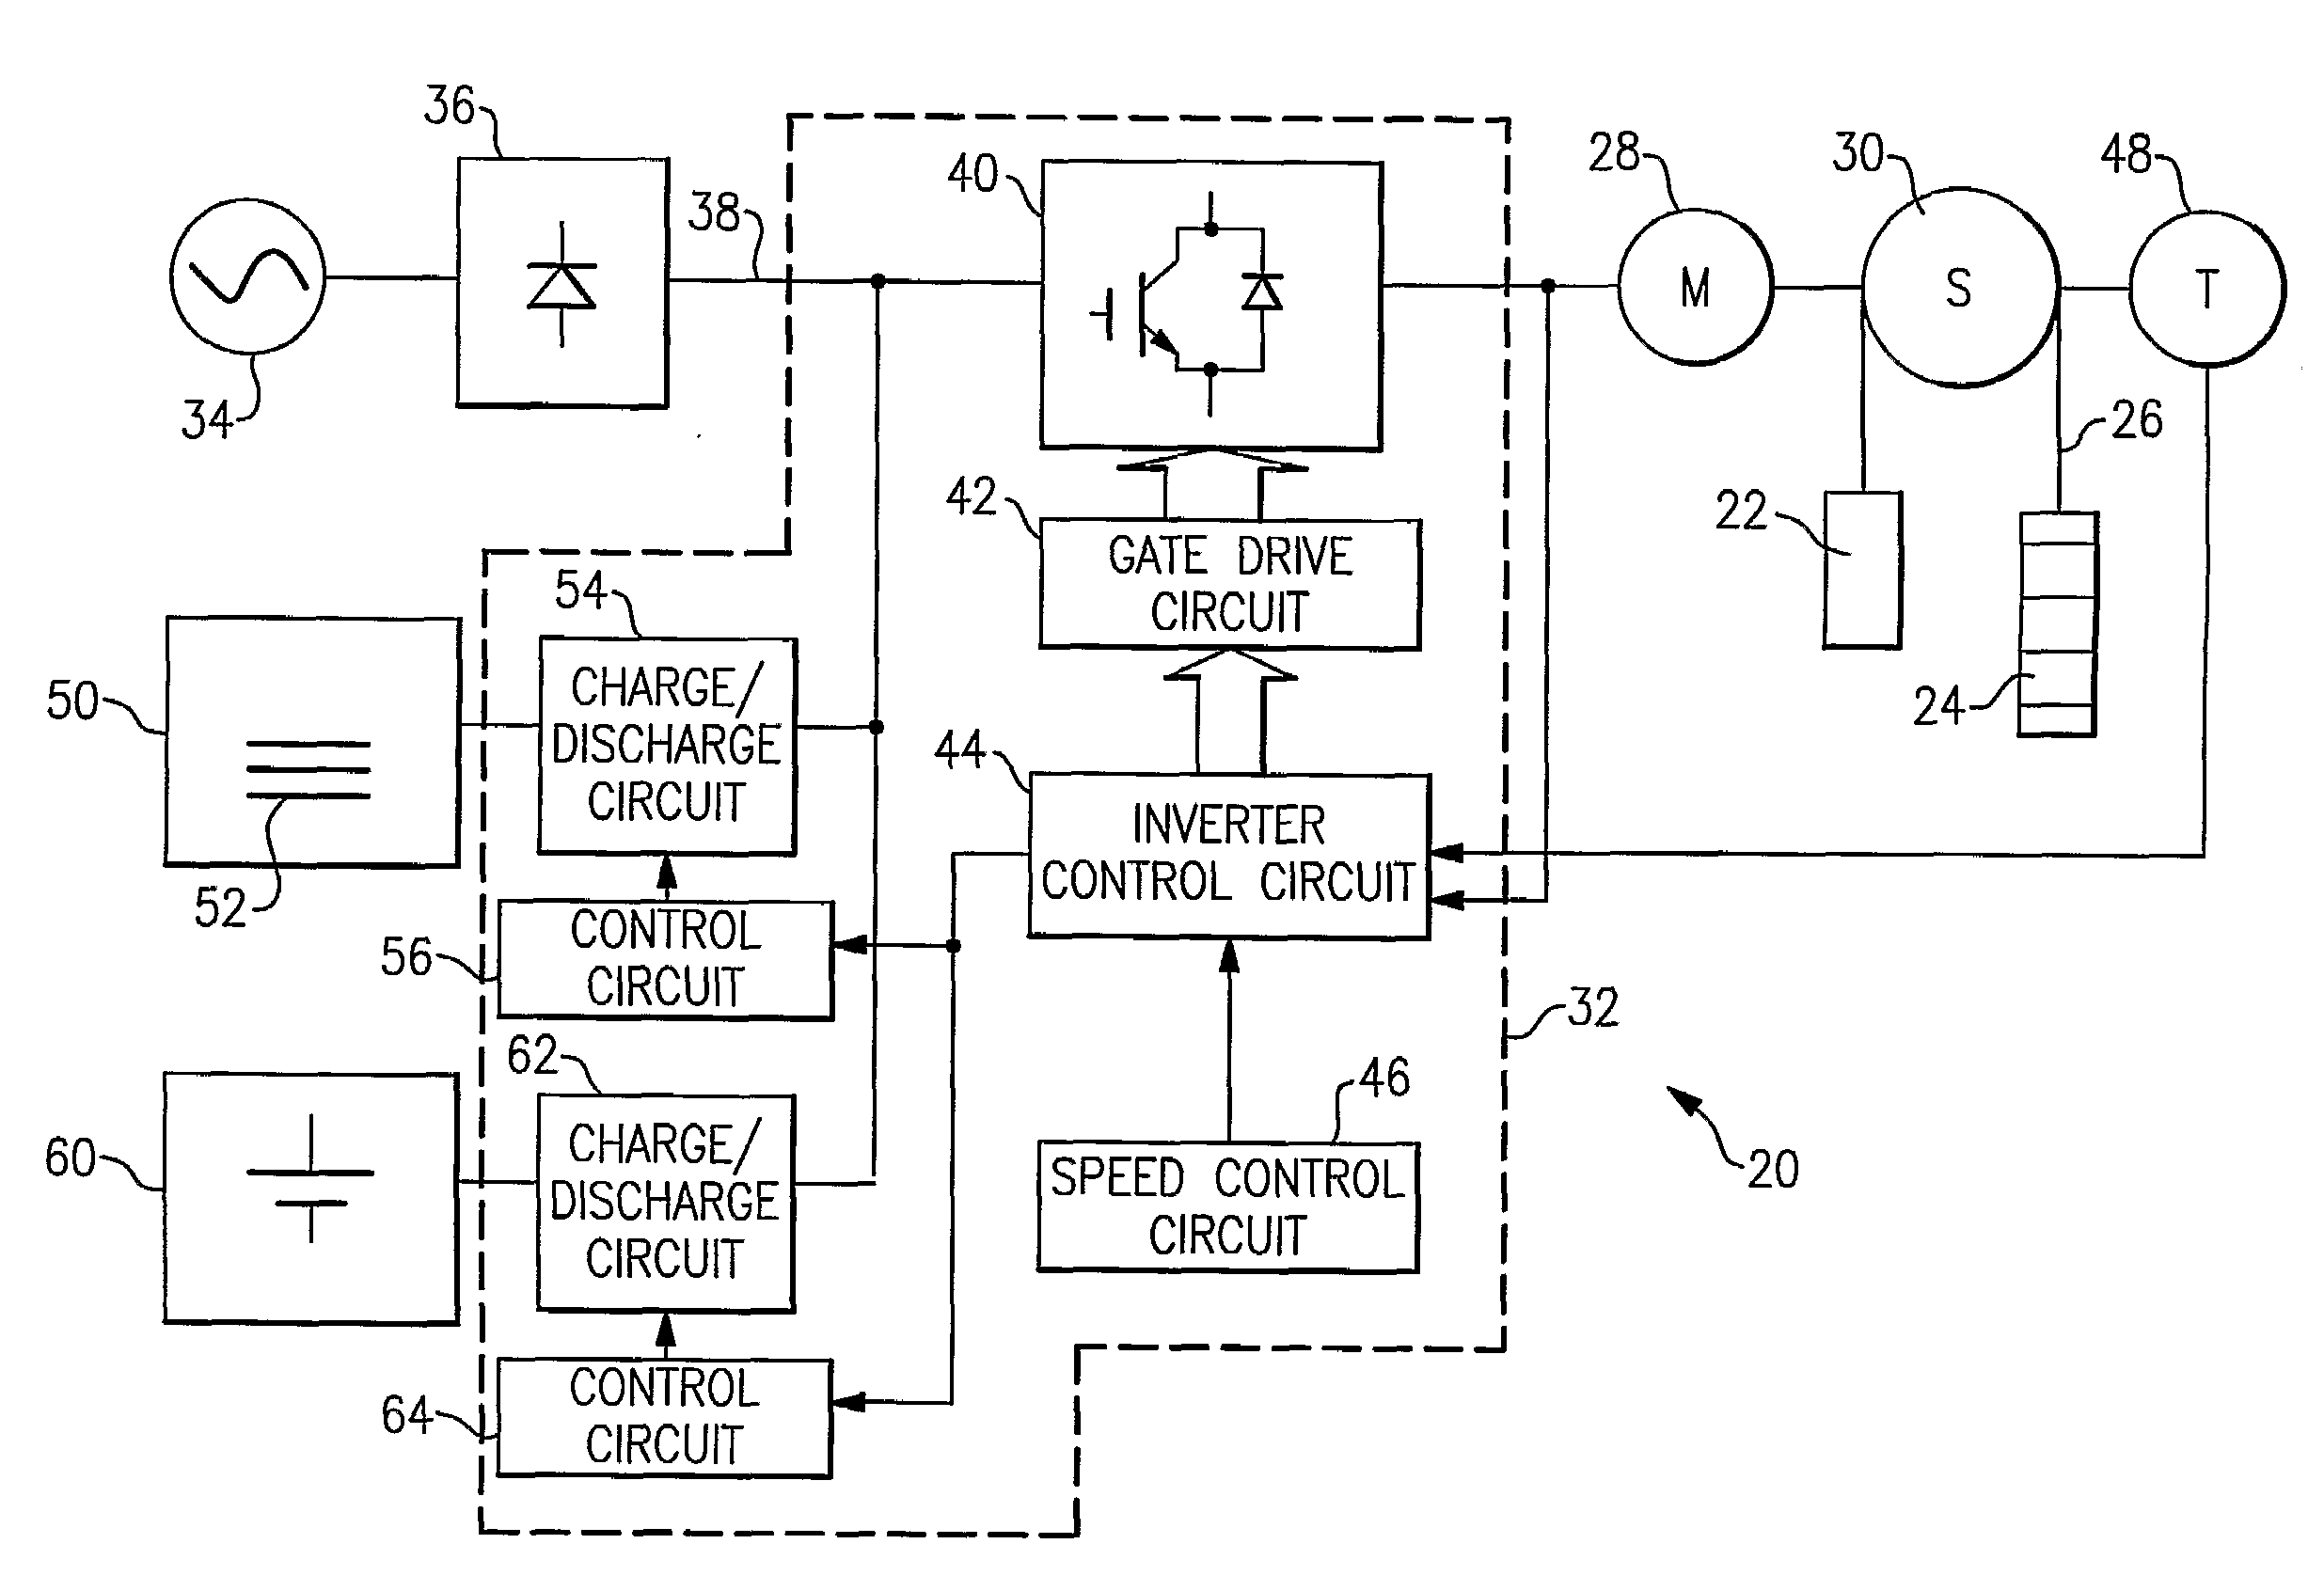 Elevator drive assembly including a capacitive energy storage device